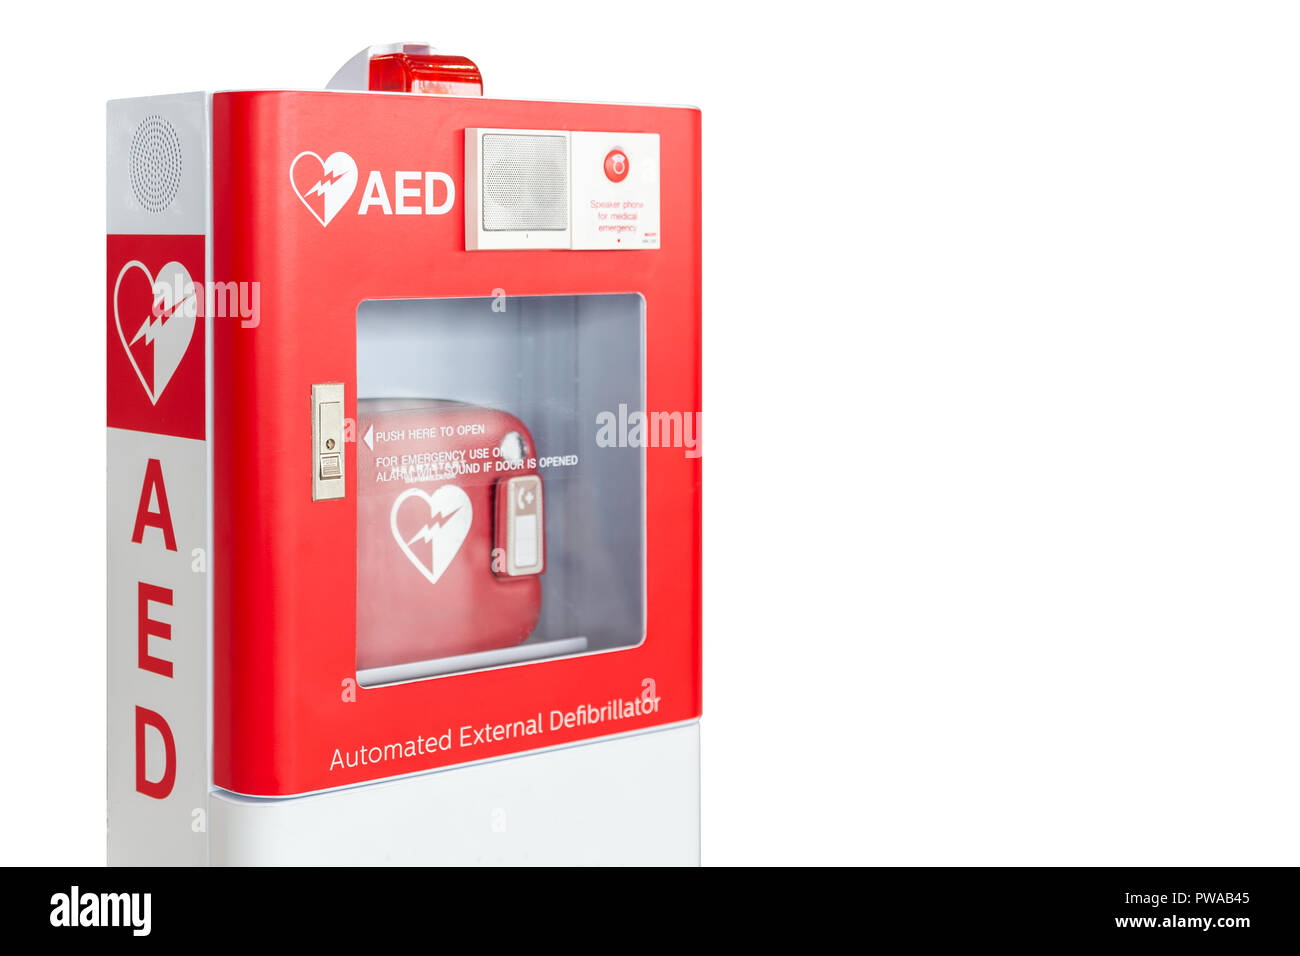 AED box or Automated External Defibrillator medical first aid device isolated on white background Stock Photo